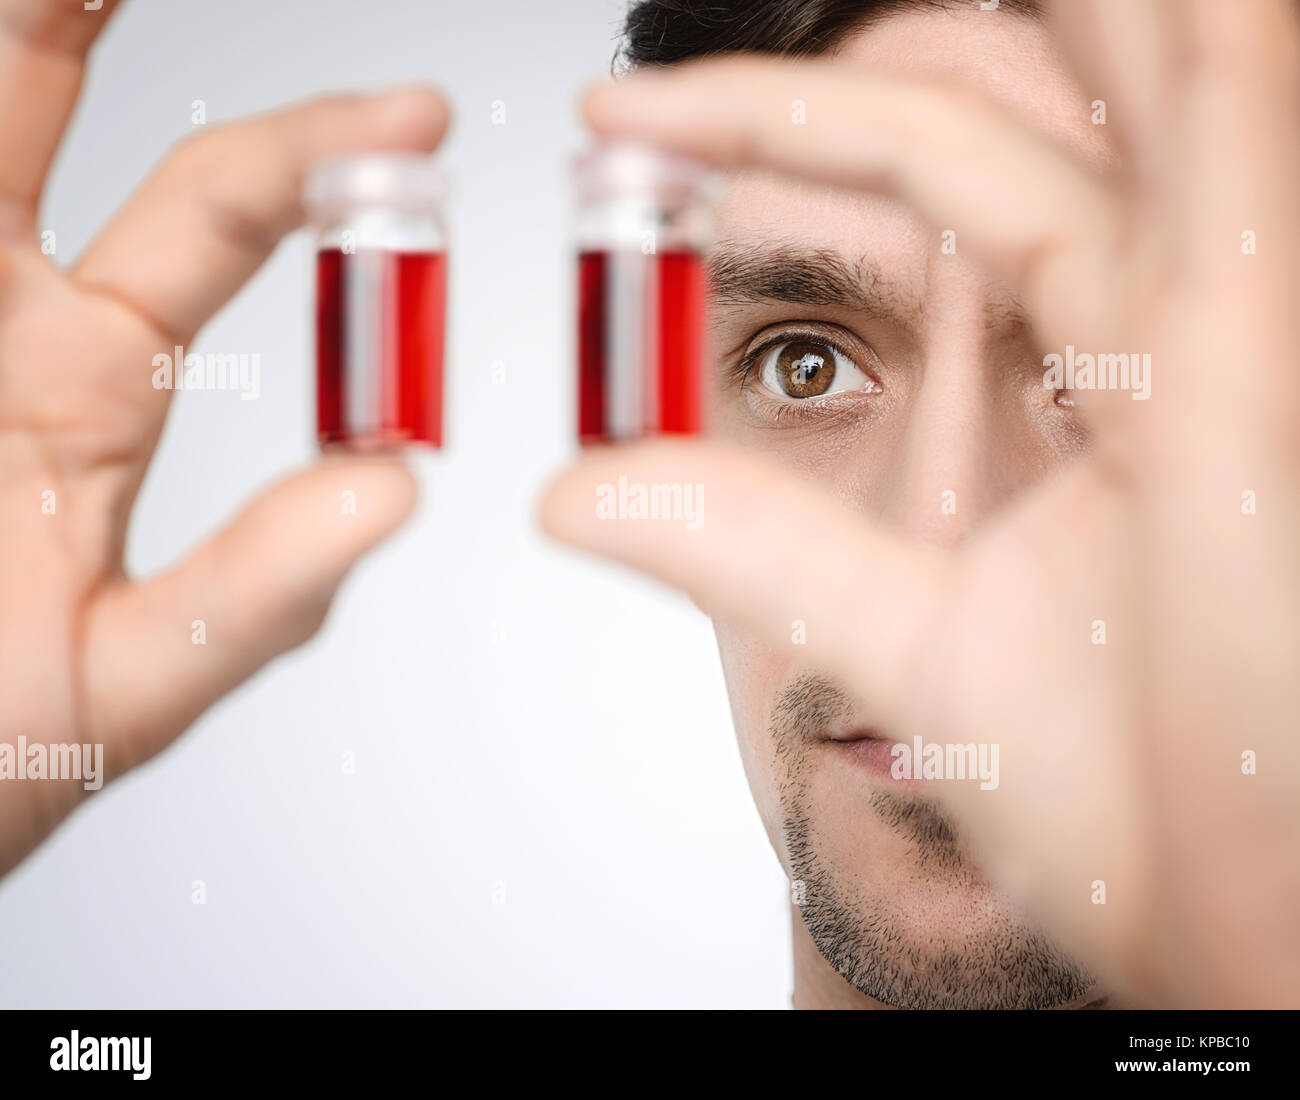 Young male medic or researcher holds up liquid samples. Shallow DOF, focus on the face. This image is toned. Stock Photo